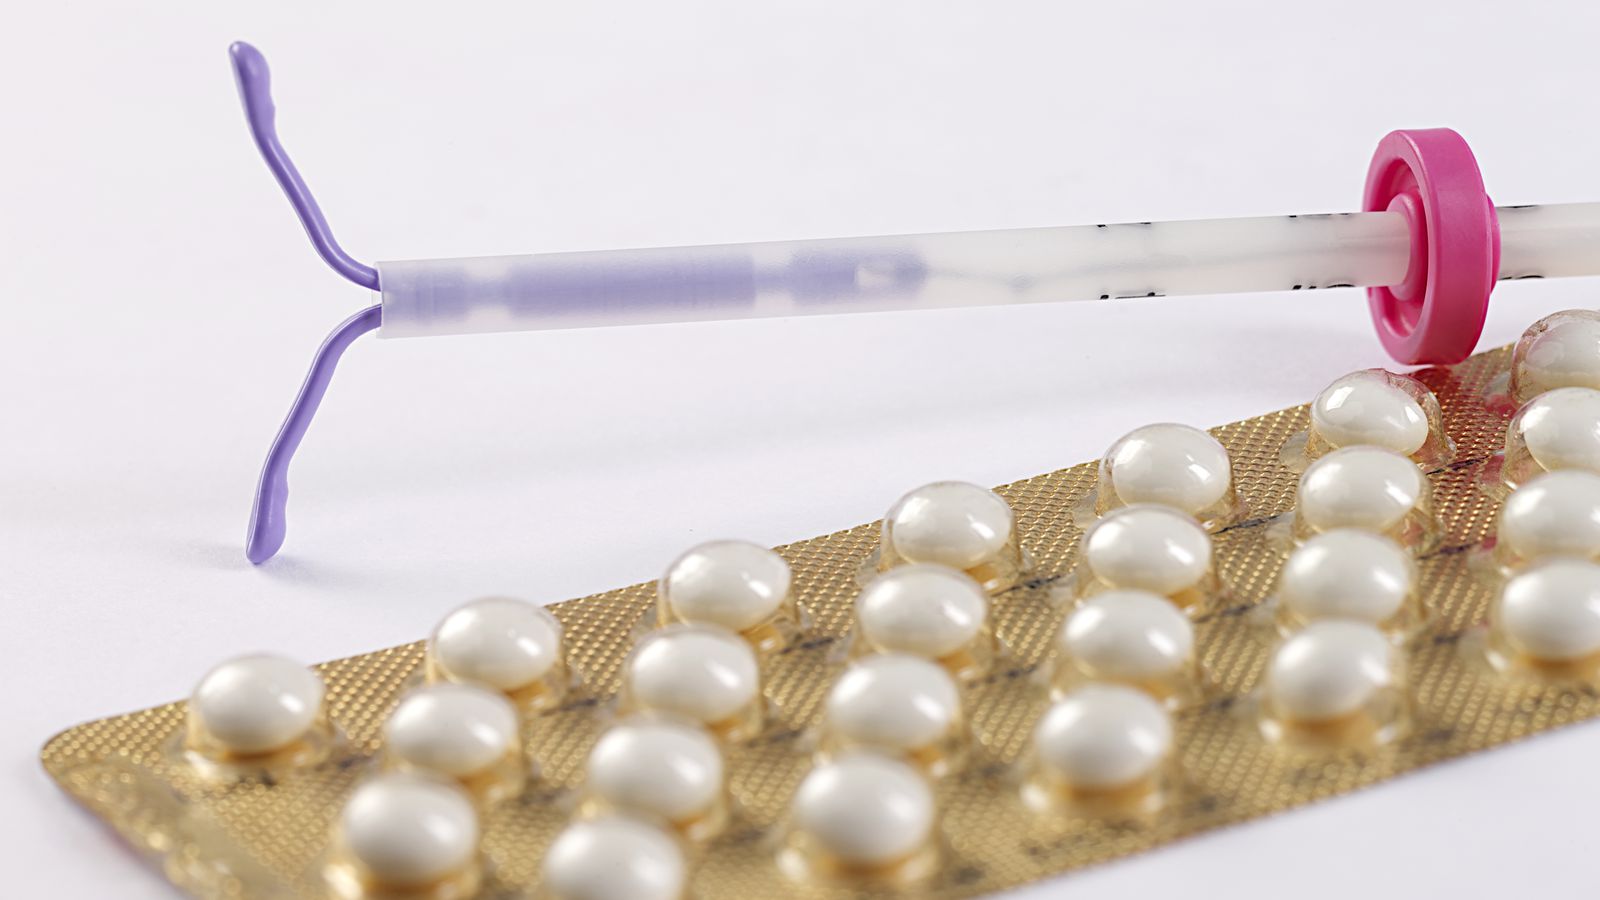 Hormonal contraceptives – how to take them safely?